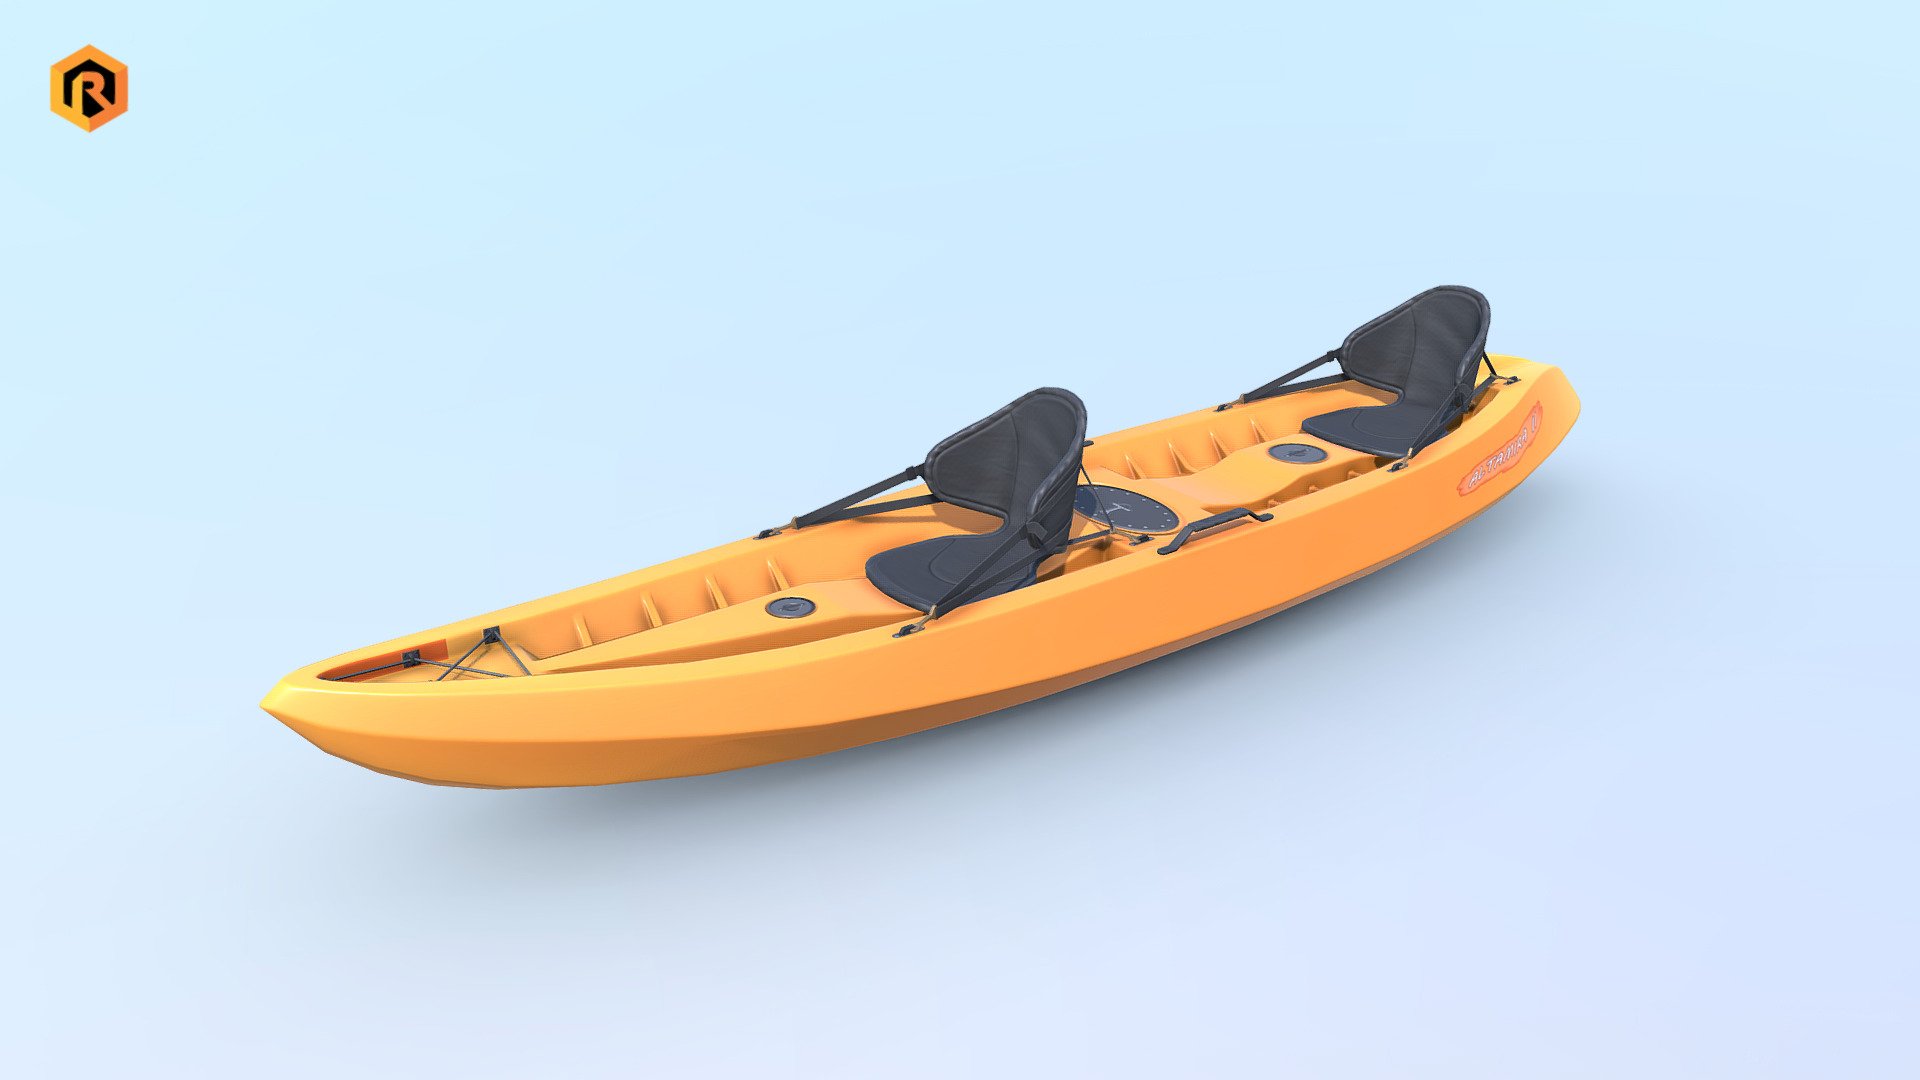 High-quality low-poly PBR 3D model of Lifeguard Rescue Kayak. 

It is best for use in games and other VR / AR, real-time applications such as Unity or Unreal Engine.

It can also be rendered in Blender (ex Cycles) or Vray as the model is equipped with all required PBR textures.

Model is built with great attention to details and realistic proportions with correct geometry. 

PBR texture sets are very detailed so it makes this model good enough for close-up.

Technical details:

- PBR Body texture set 4096 (Albedo, Metallic, Smoothness, Normal, AO)

- PBR Seat texture set 2048 (Albedo, Metallic, Smoothness, Normal, AO)

- 4244 Triangles.

- 4635  Vertices.

- The model is divided into few 2 objects Body, Seats)

- Model completely unwrapped. 
- Model is fully textured with all materials applied.

- Pivot points are correctly placed to suit animation process.

- Model scaled to approximate real world size (centimeters).

- All nodes, materials and textures are appropriately named 3d model